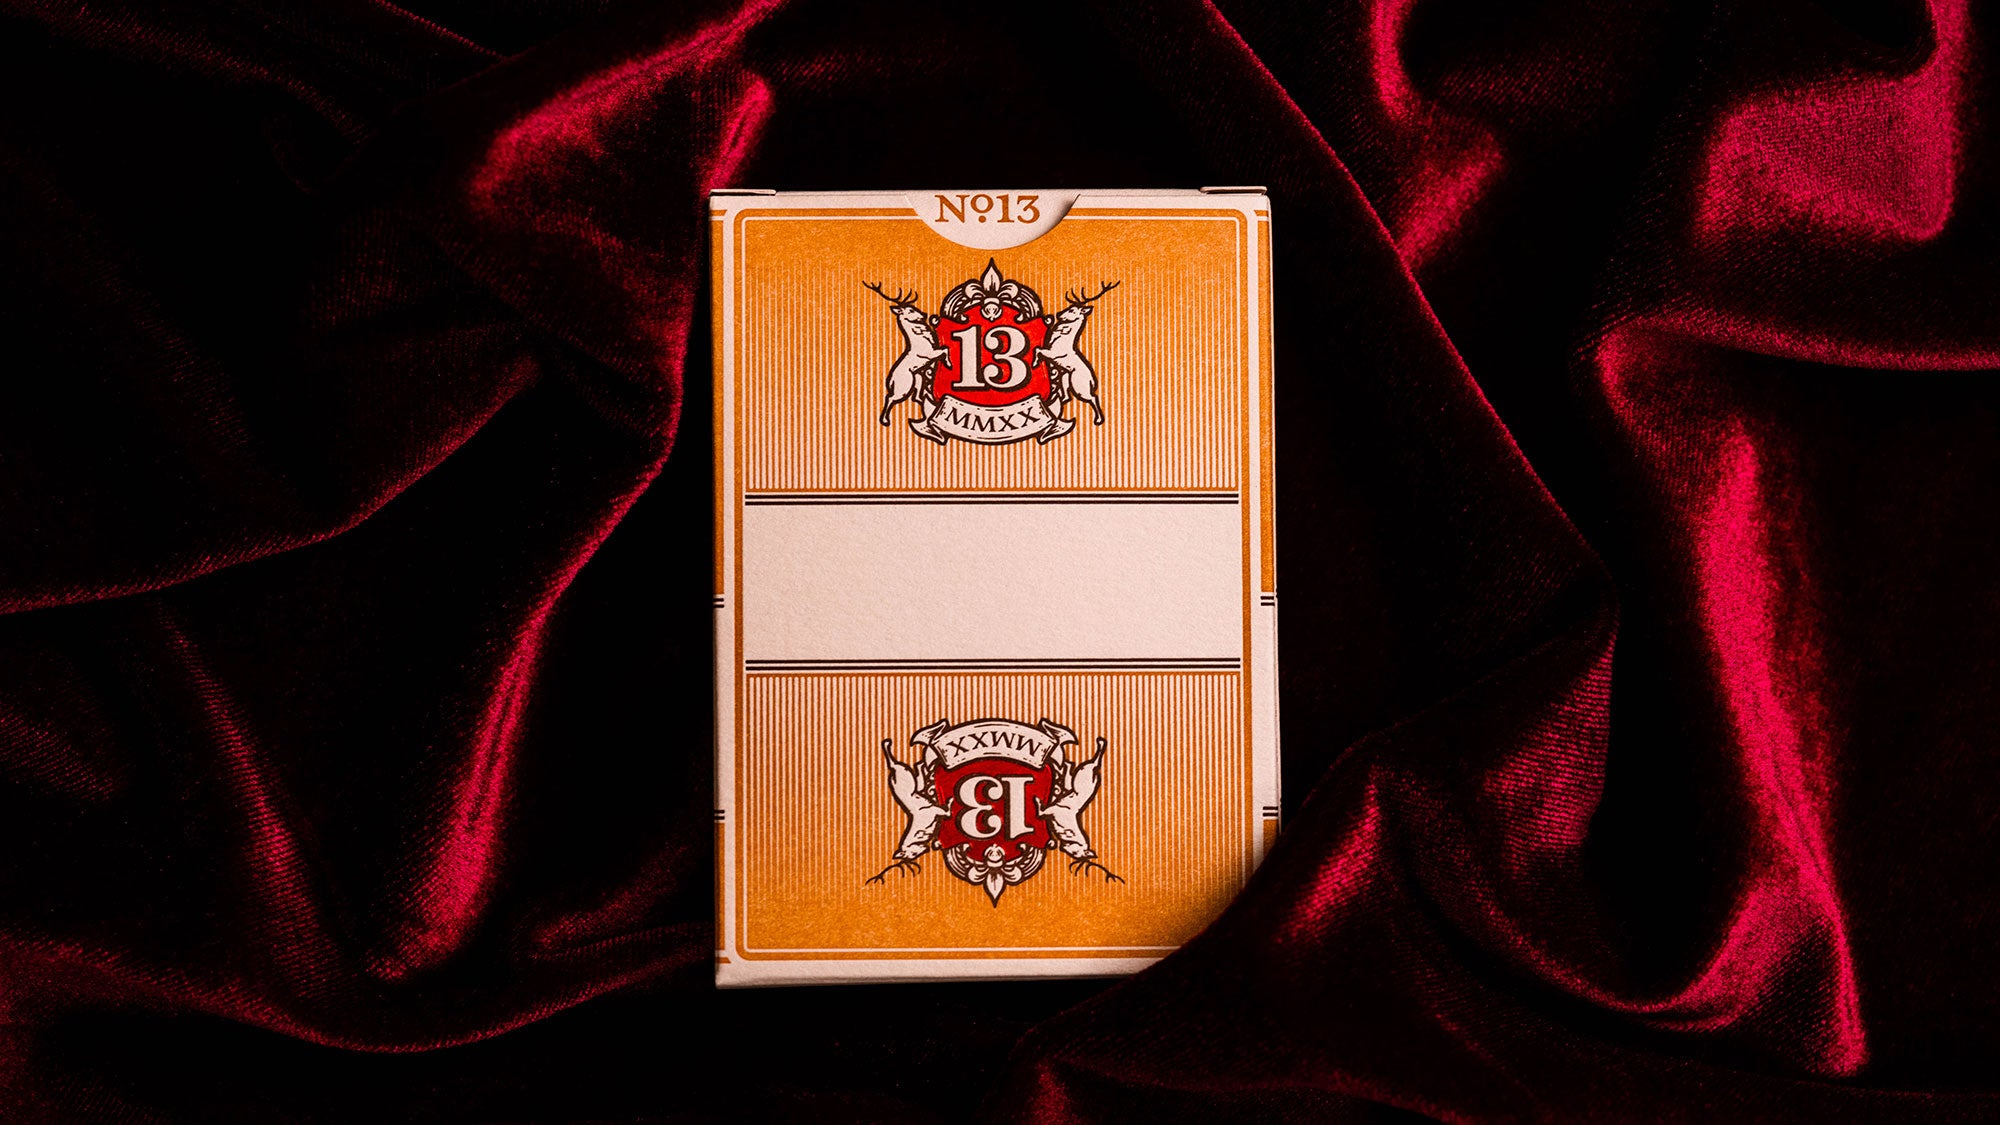 Table Players Vol. 04 Luxury Playing Cards